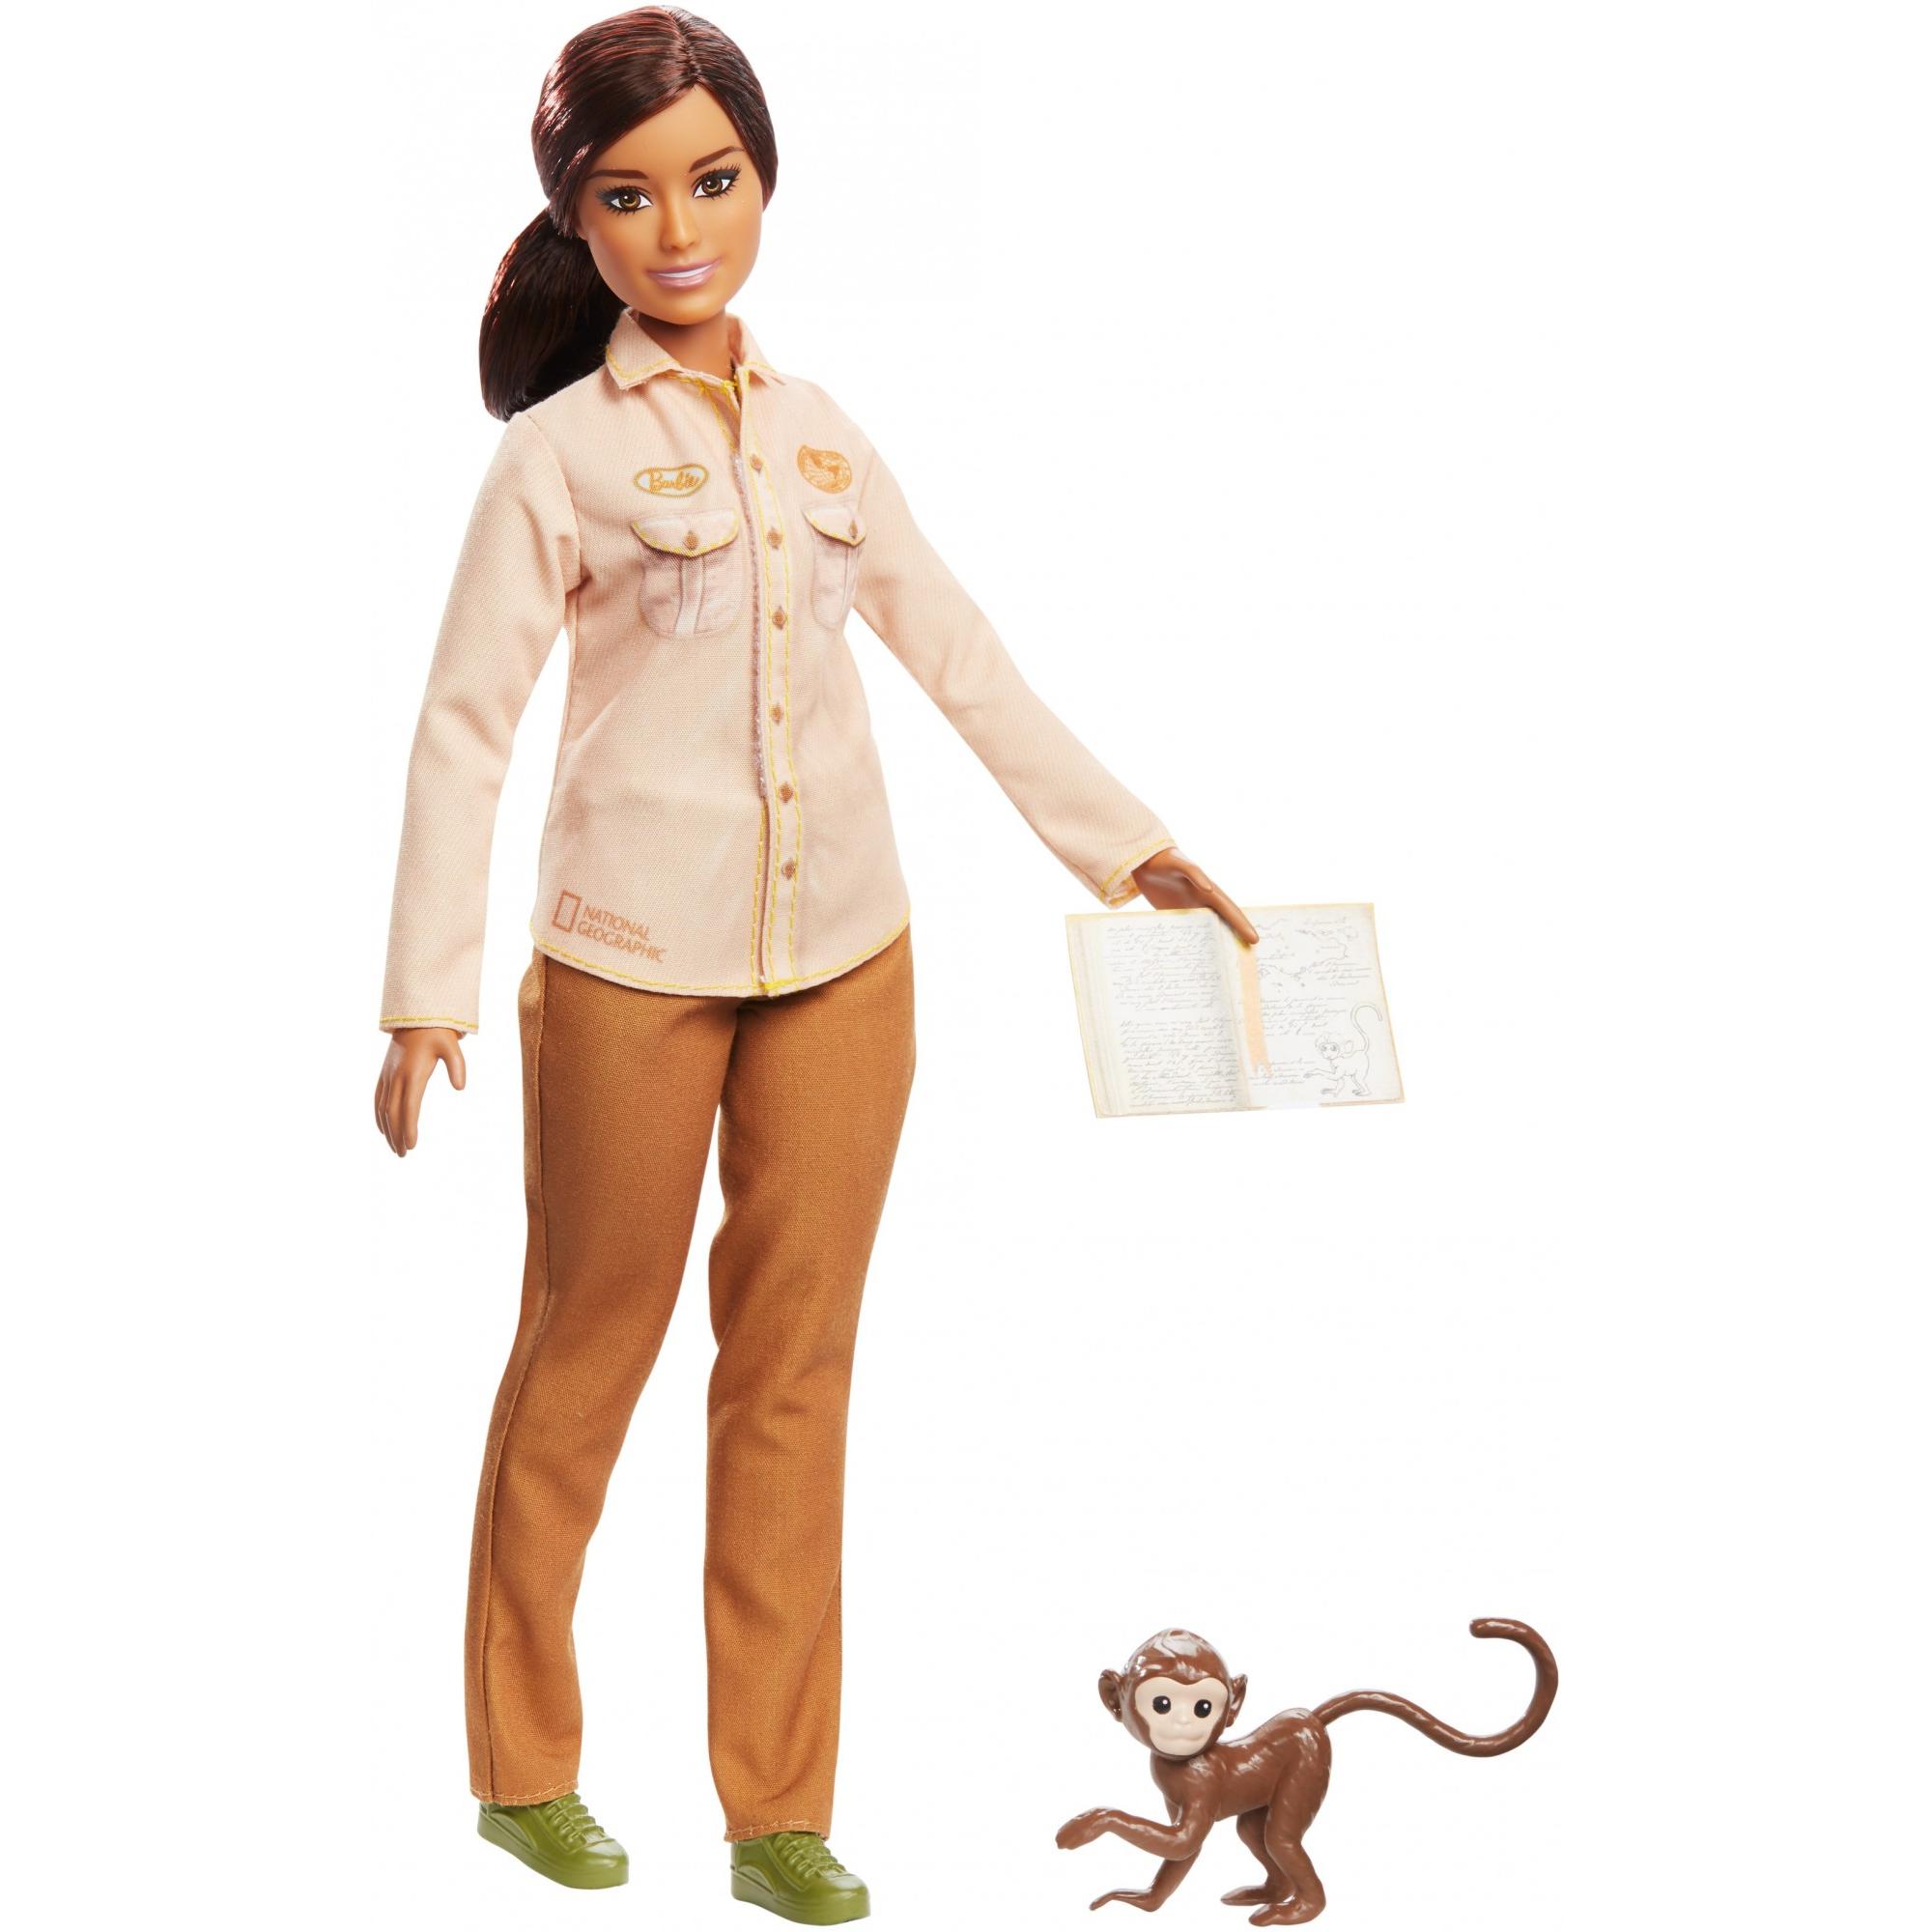 Barbie National Geographic Wildlife Conservationist Doll Playset, 3 Pieces Included - image 1 of 7